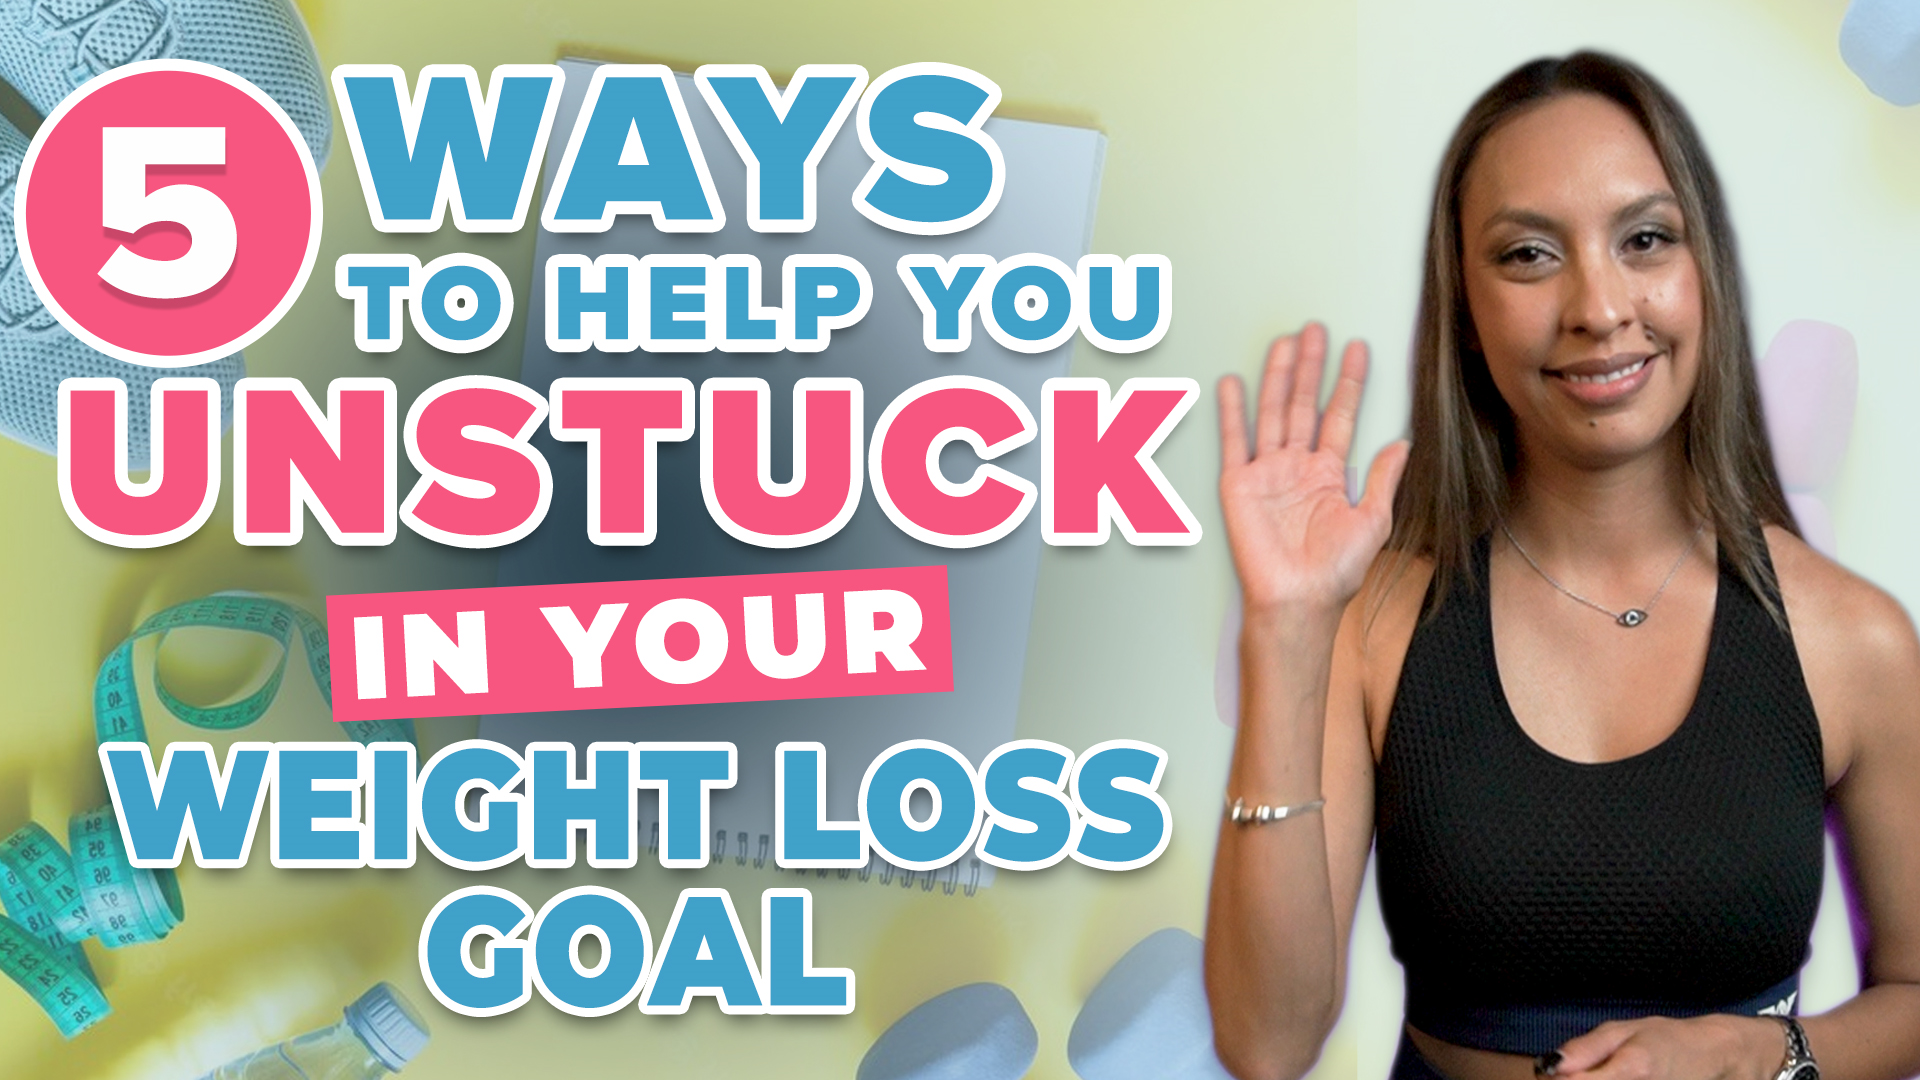 Weight Loss Plateau? Get Unstuck Losing Weight With These 5 Tips